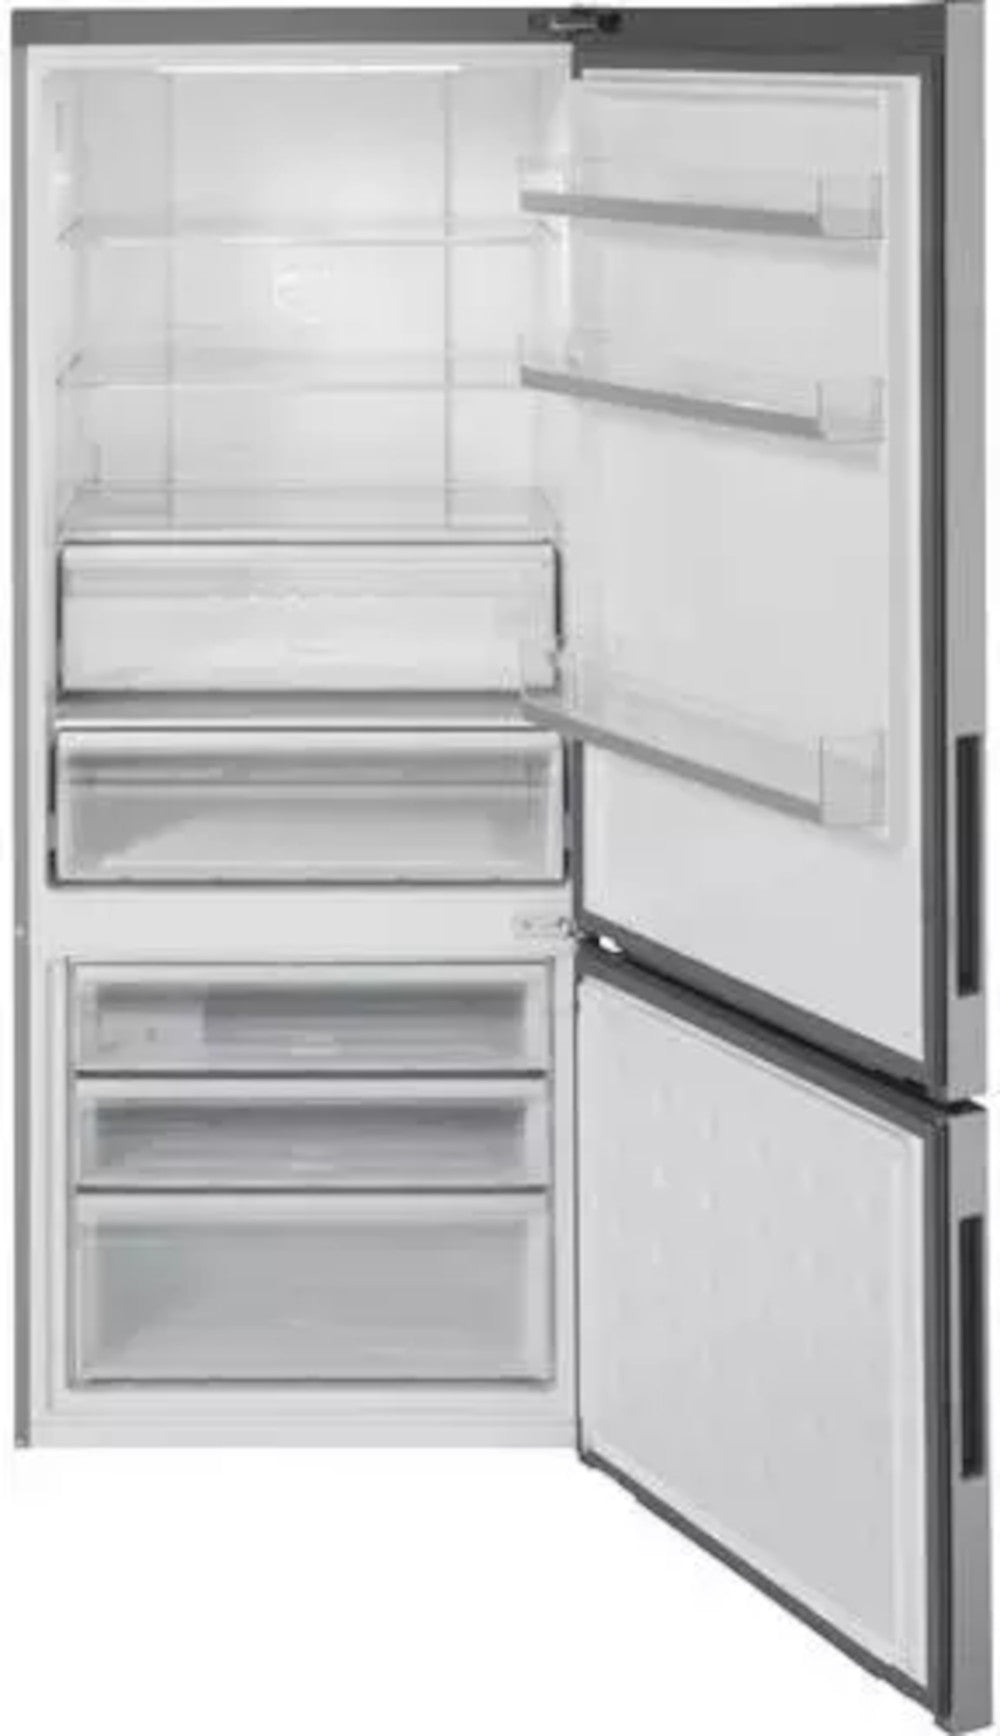 Haier - 27.6 Inch 15 cu. ft Bottom Mount Refrigerator in Stainless - HRB15N3BGS